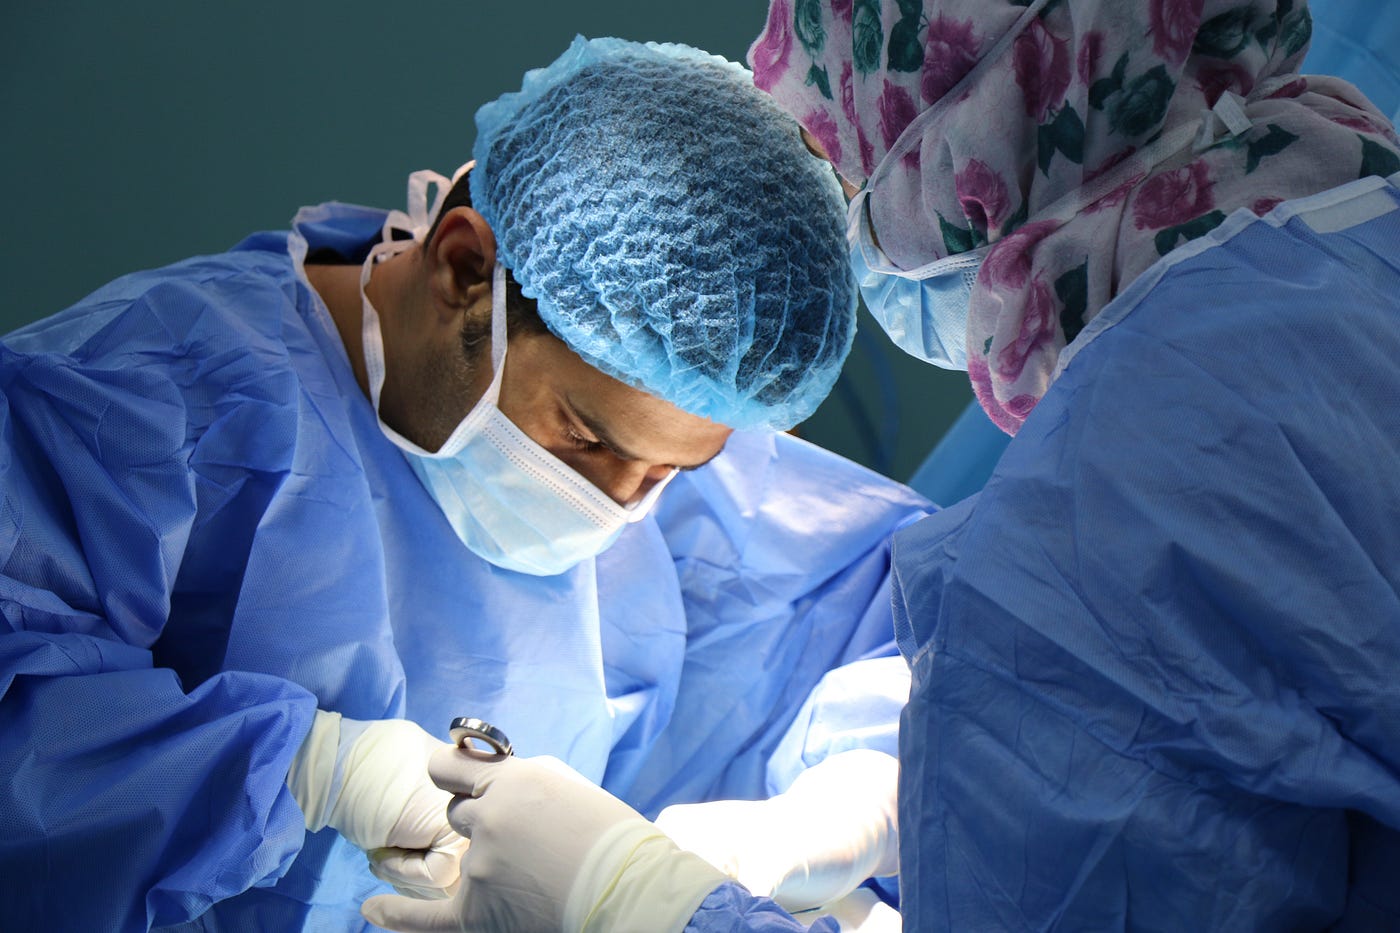 A surgeon operates on a patient, scalpel in his right hand. Roundtree had a modified radical mastectomy. Surgeons removed his breast and underarm (axillary) lymph nodes.